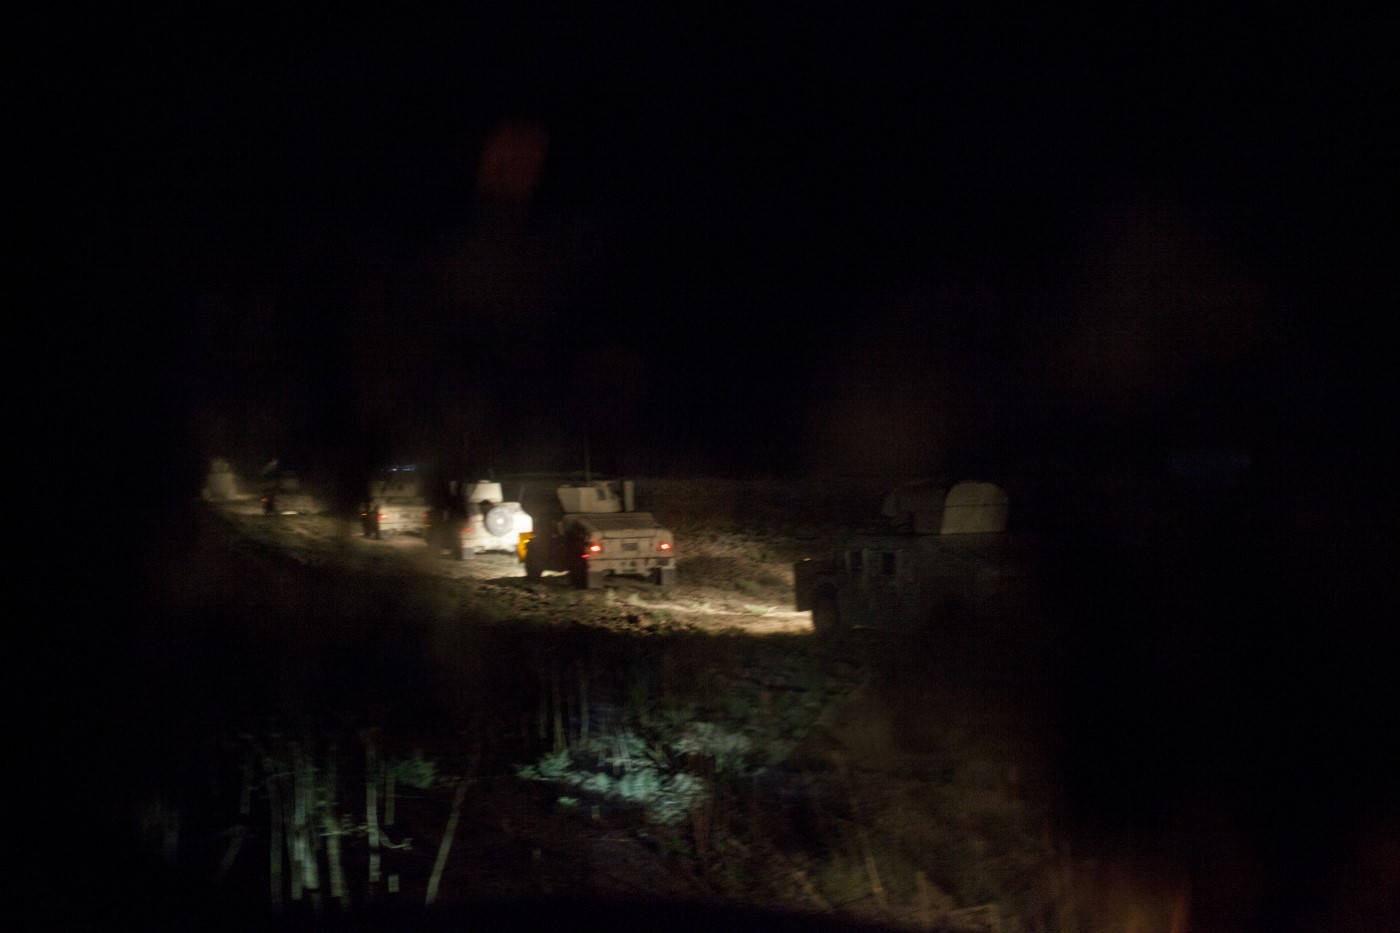 A convoy of Peshmerga militia tanks moving at night in a special operation from the military base to the Tuz Khurmatu front line. Tuz Khurmatu, Kurdistan, Iraq. June 20, 2017. The Peshmerga operation can go for up to 12 hours. Peshmergas guard the military base and must attack IS members infiltrated in the Peshmerga front lines. Moving is not easy, since the jihadists place mines to hinder access. The Peshmerga have to disable the mines to reach the battallions.